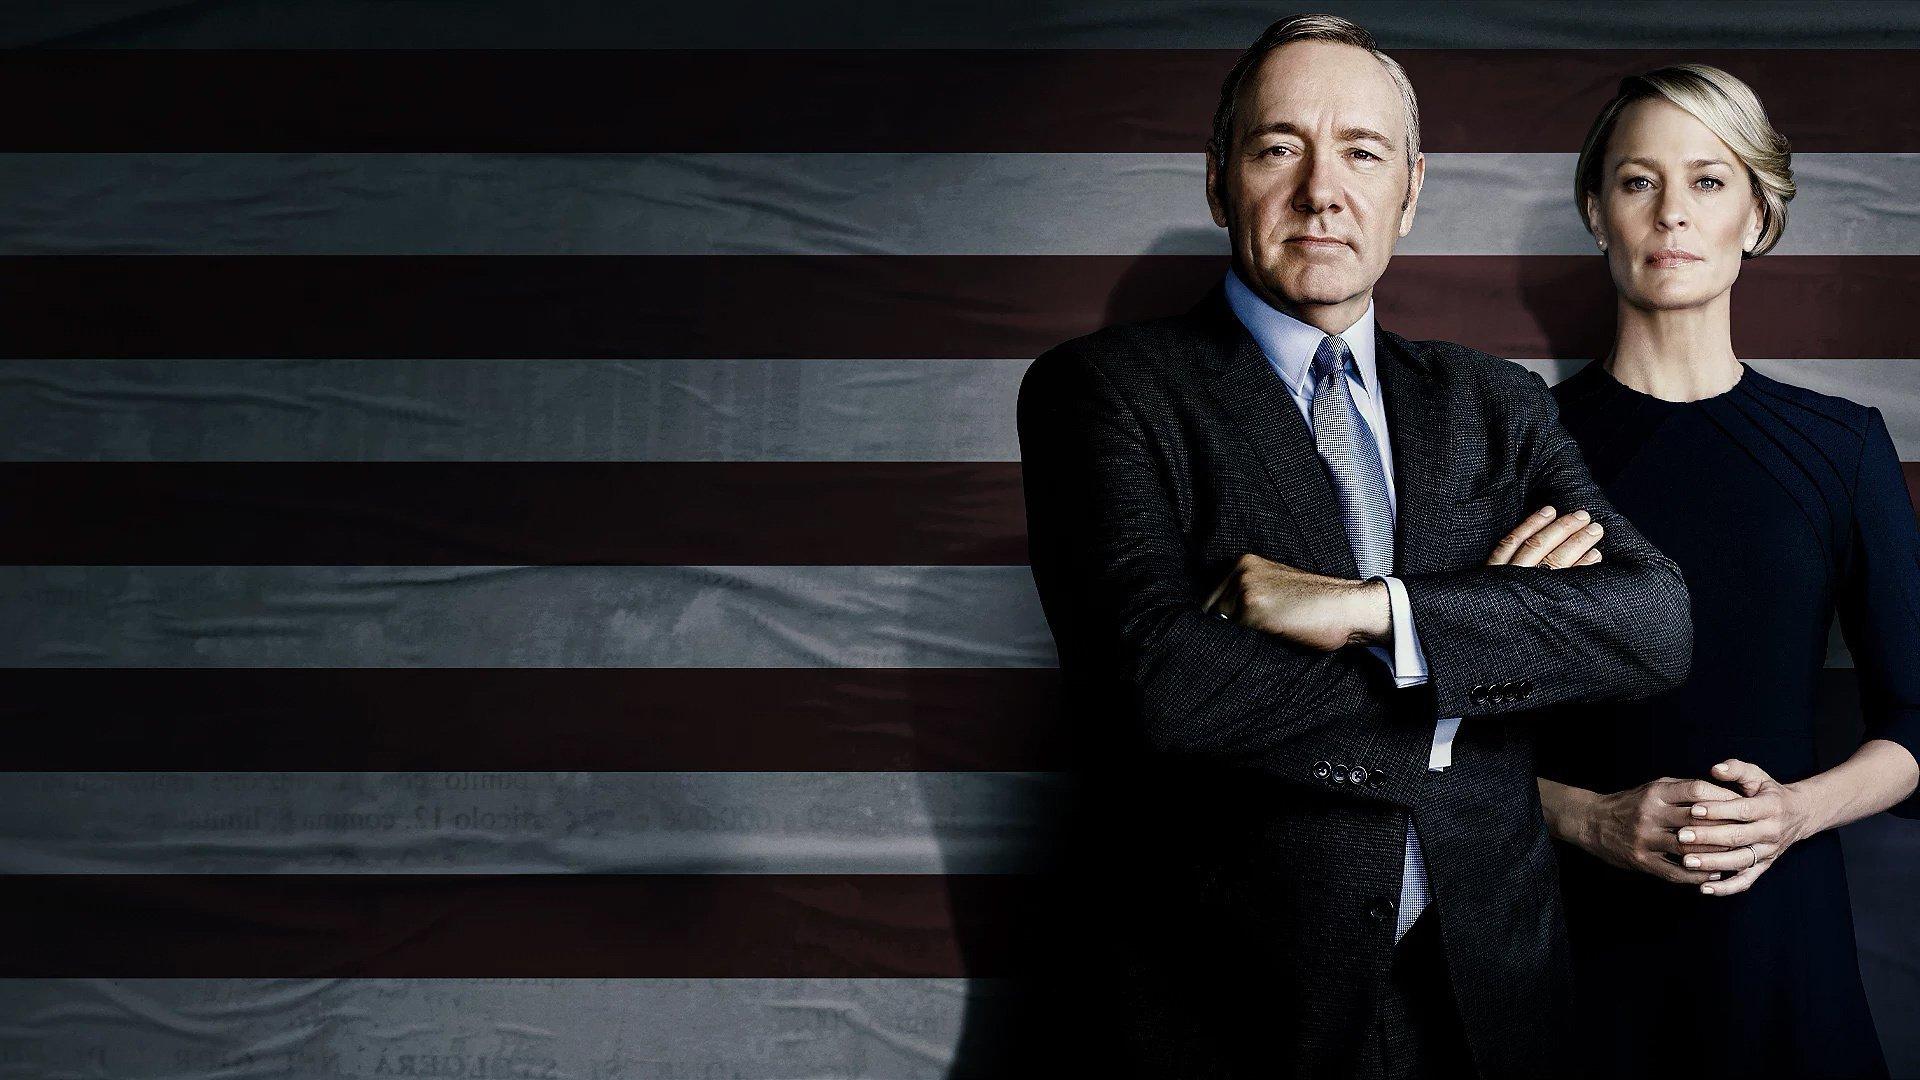 House Of Cards HD Wallpaper